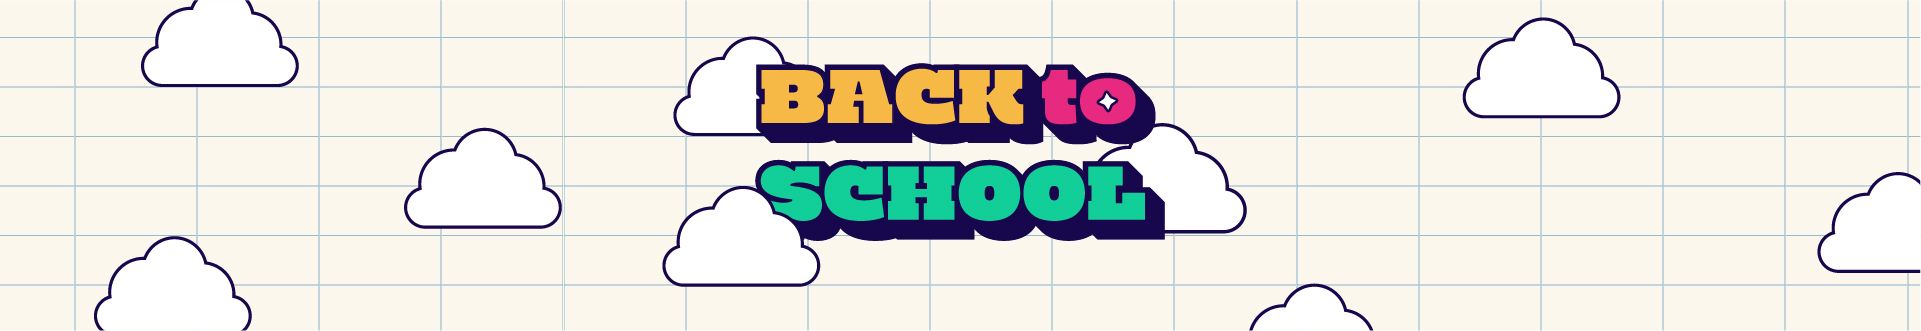 BACK TO SCHOOL 2